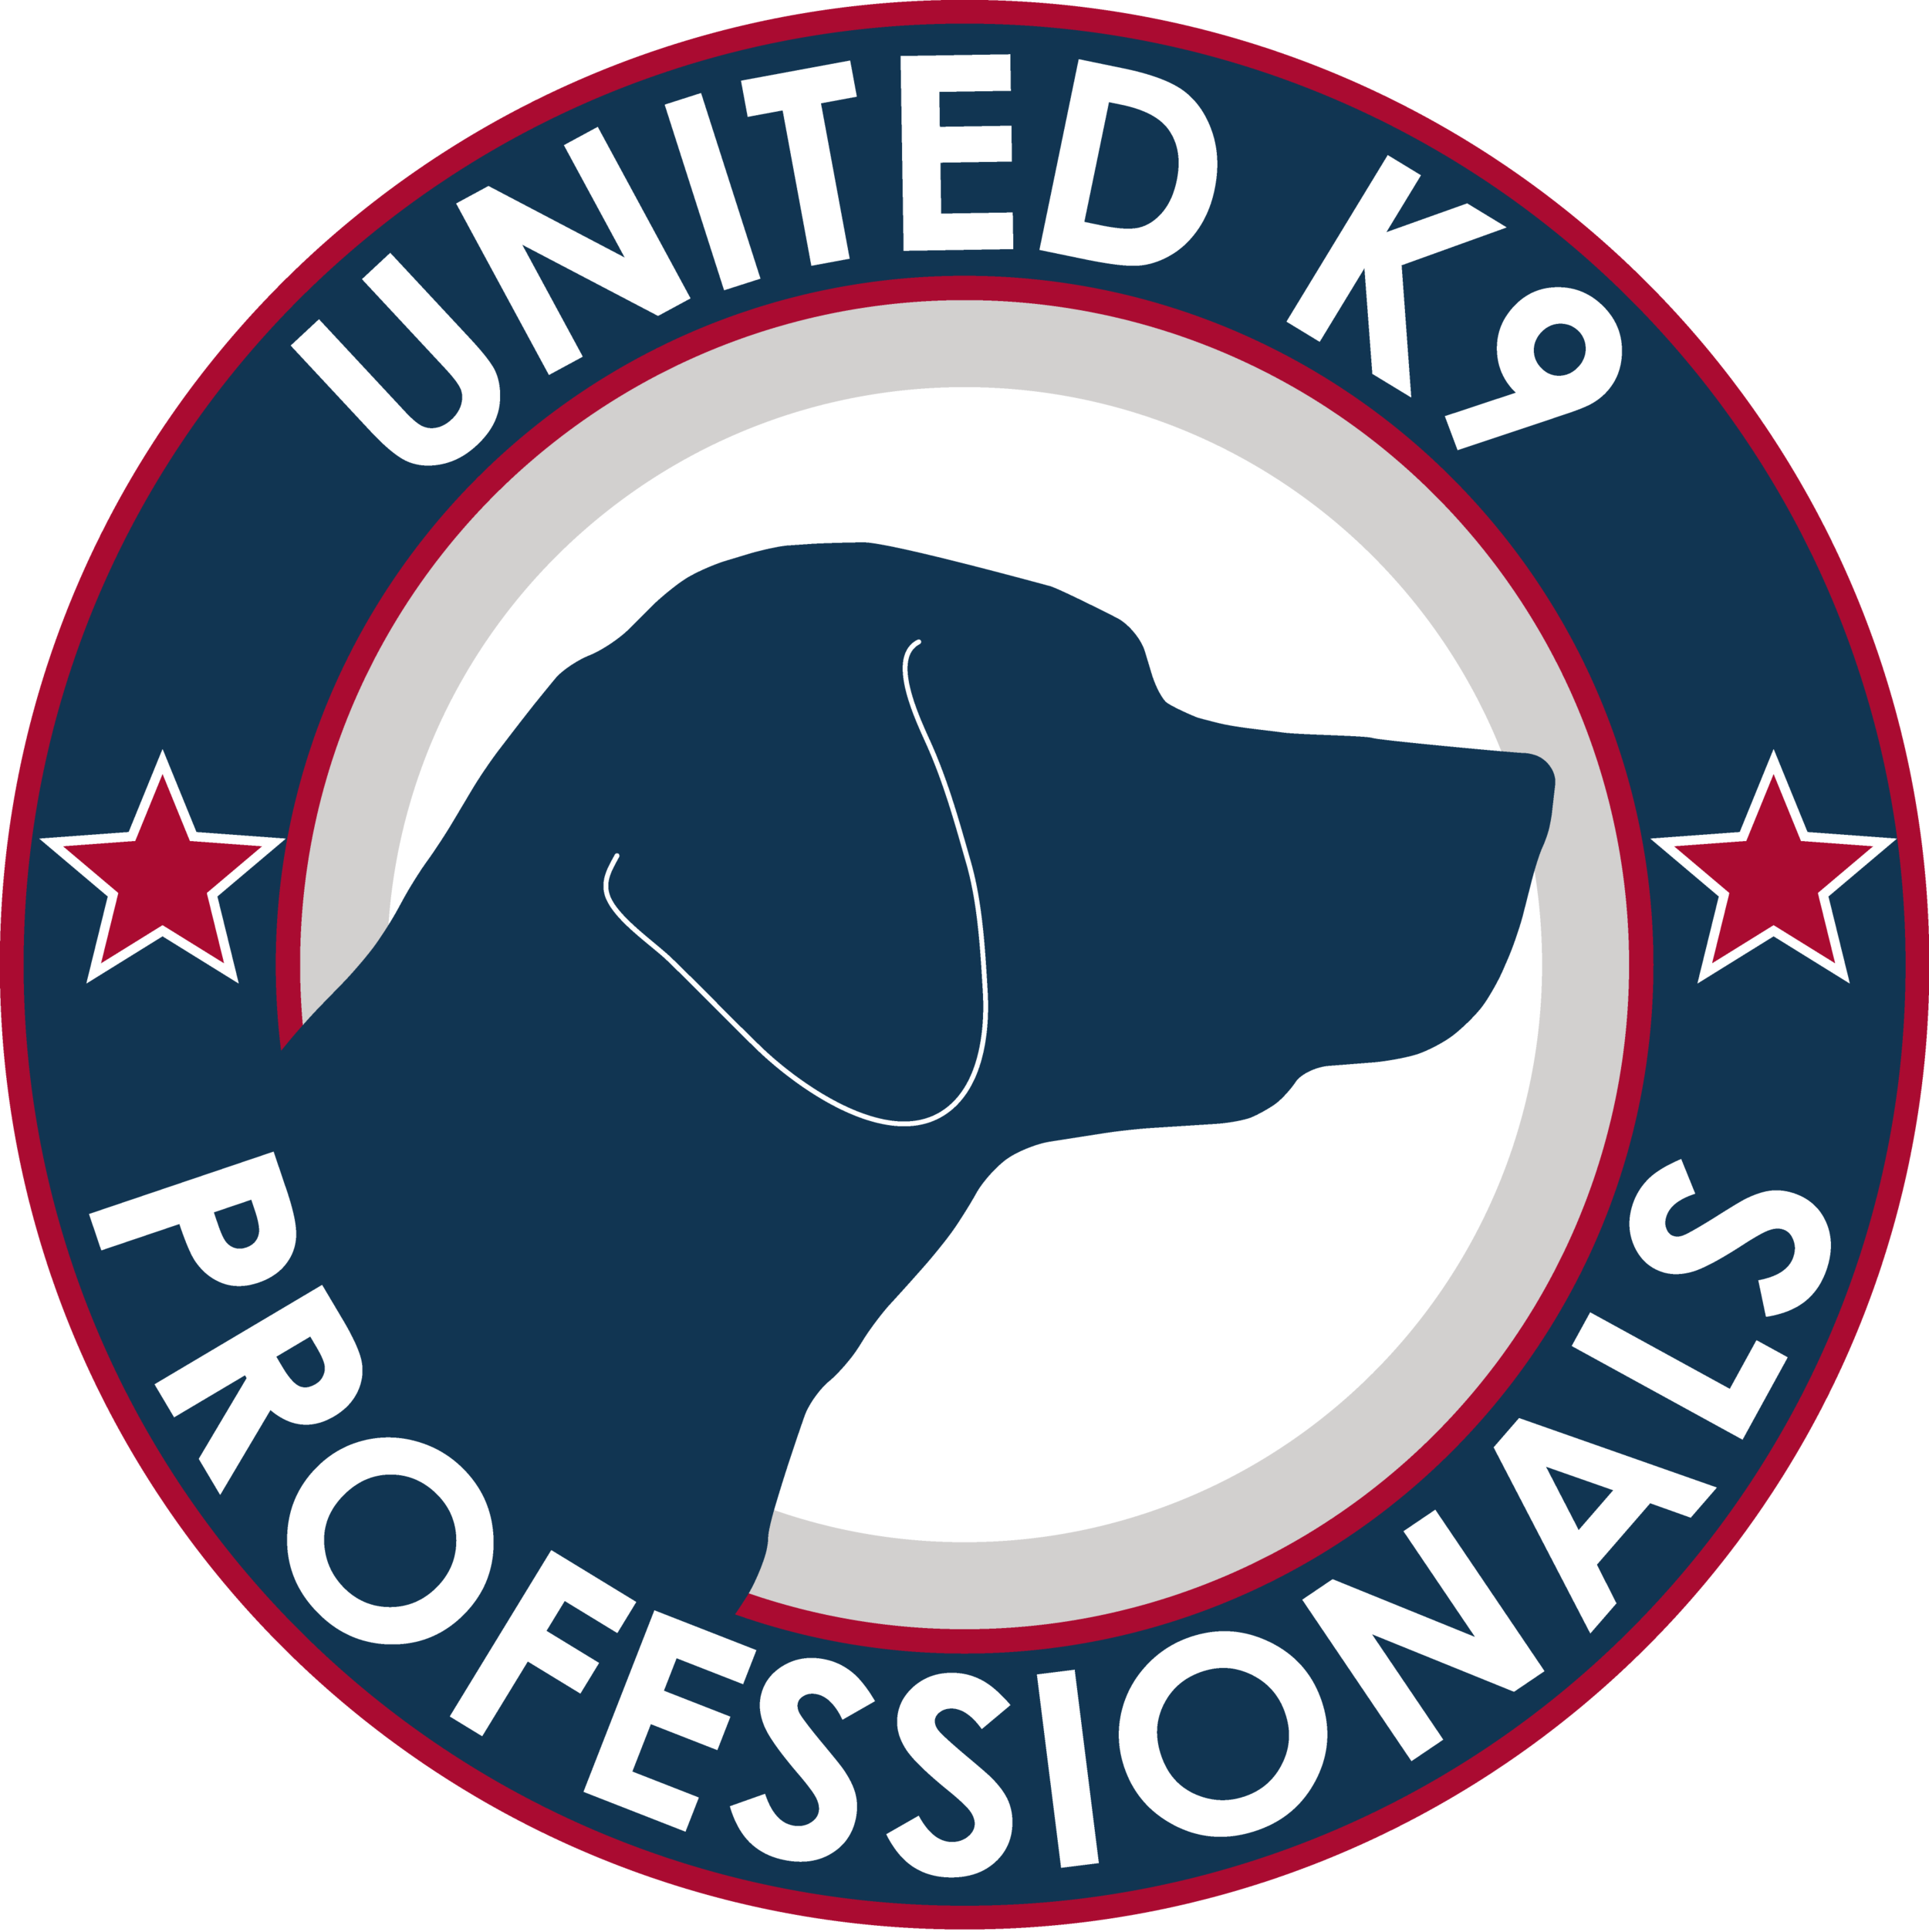 Natural Canine Behavior RehabilitationTM Specialist - Want to help change the lives of dogs with behavioral issues? Our sister company, United K9 Professionals offers a quarterly distance learning certification in Natural Canine Behavior Rehabilitation(TM) so you can become a canine behavior consultant for privately owned pets, shelter animals, rescues, and more! There is a hands-on practical component that must be scheduled with the United K9 Professionals staff.